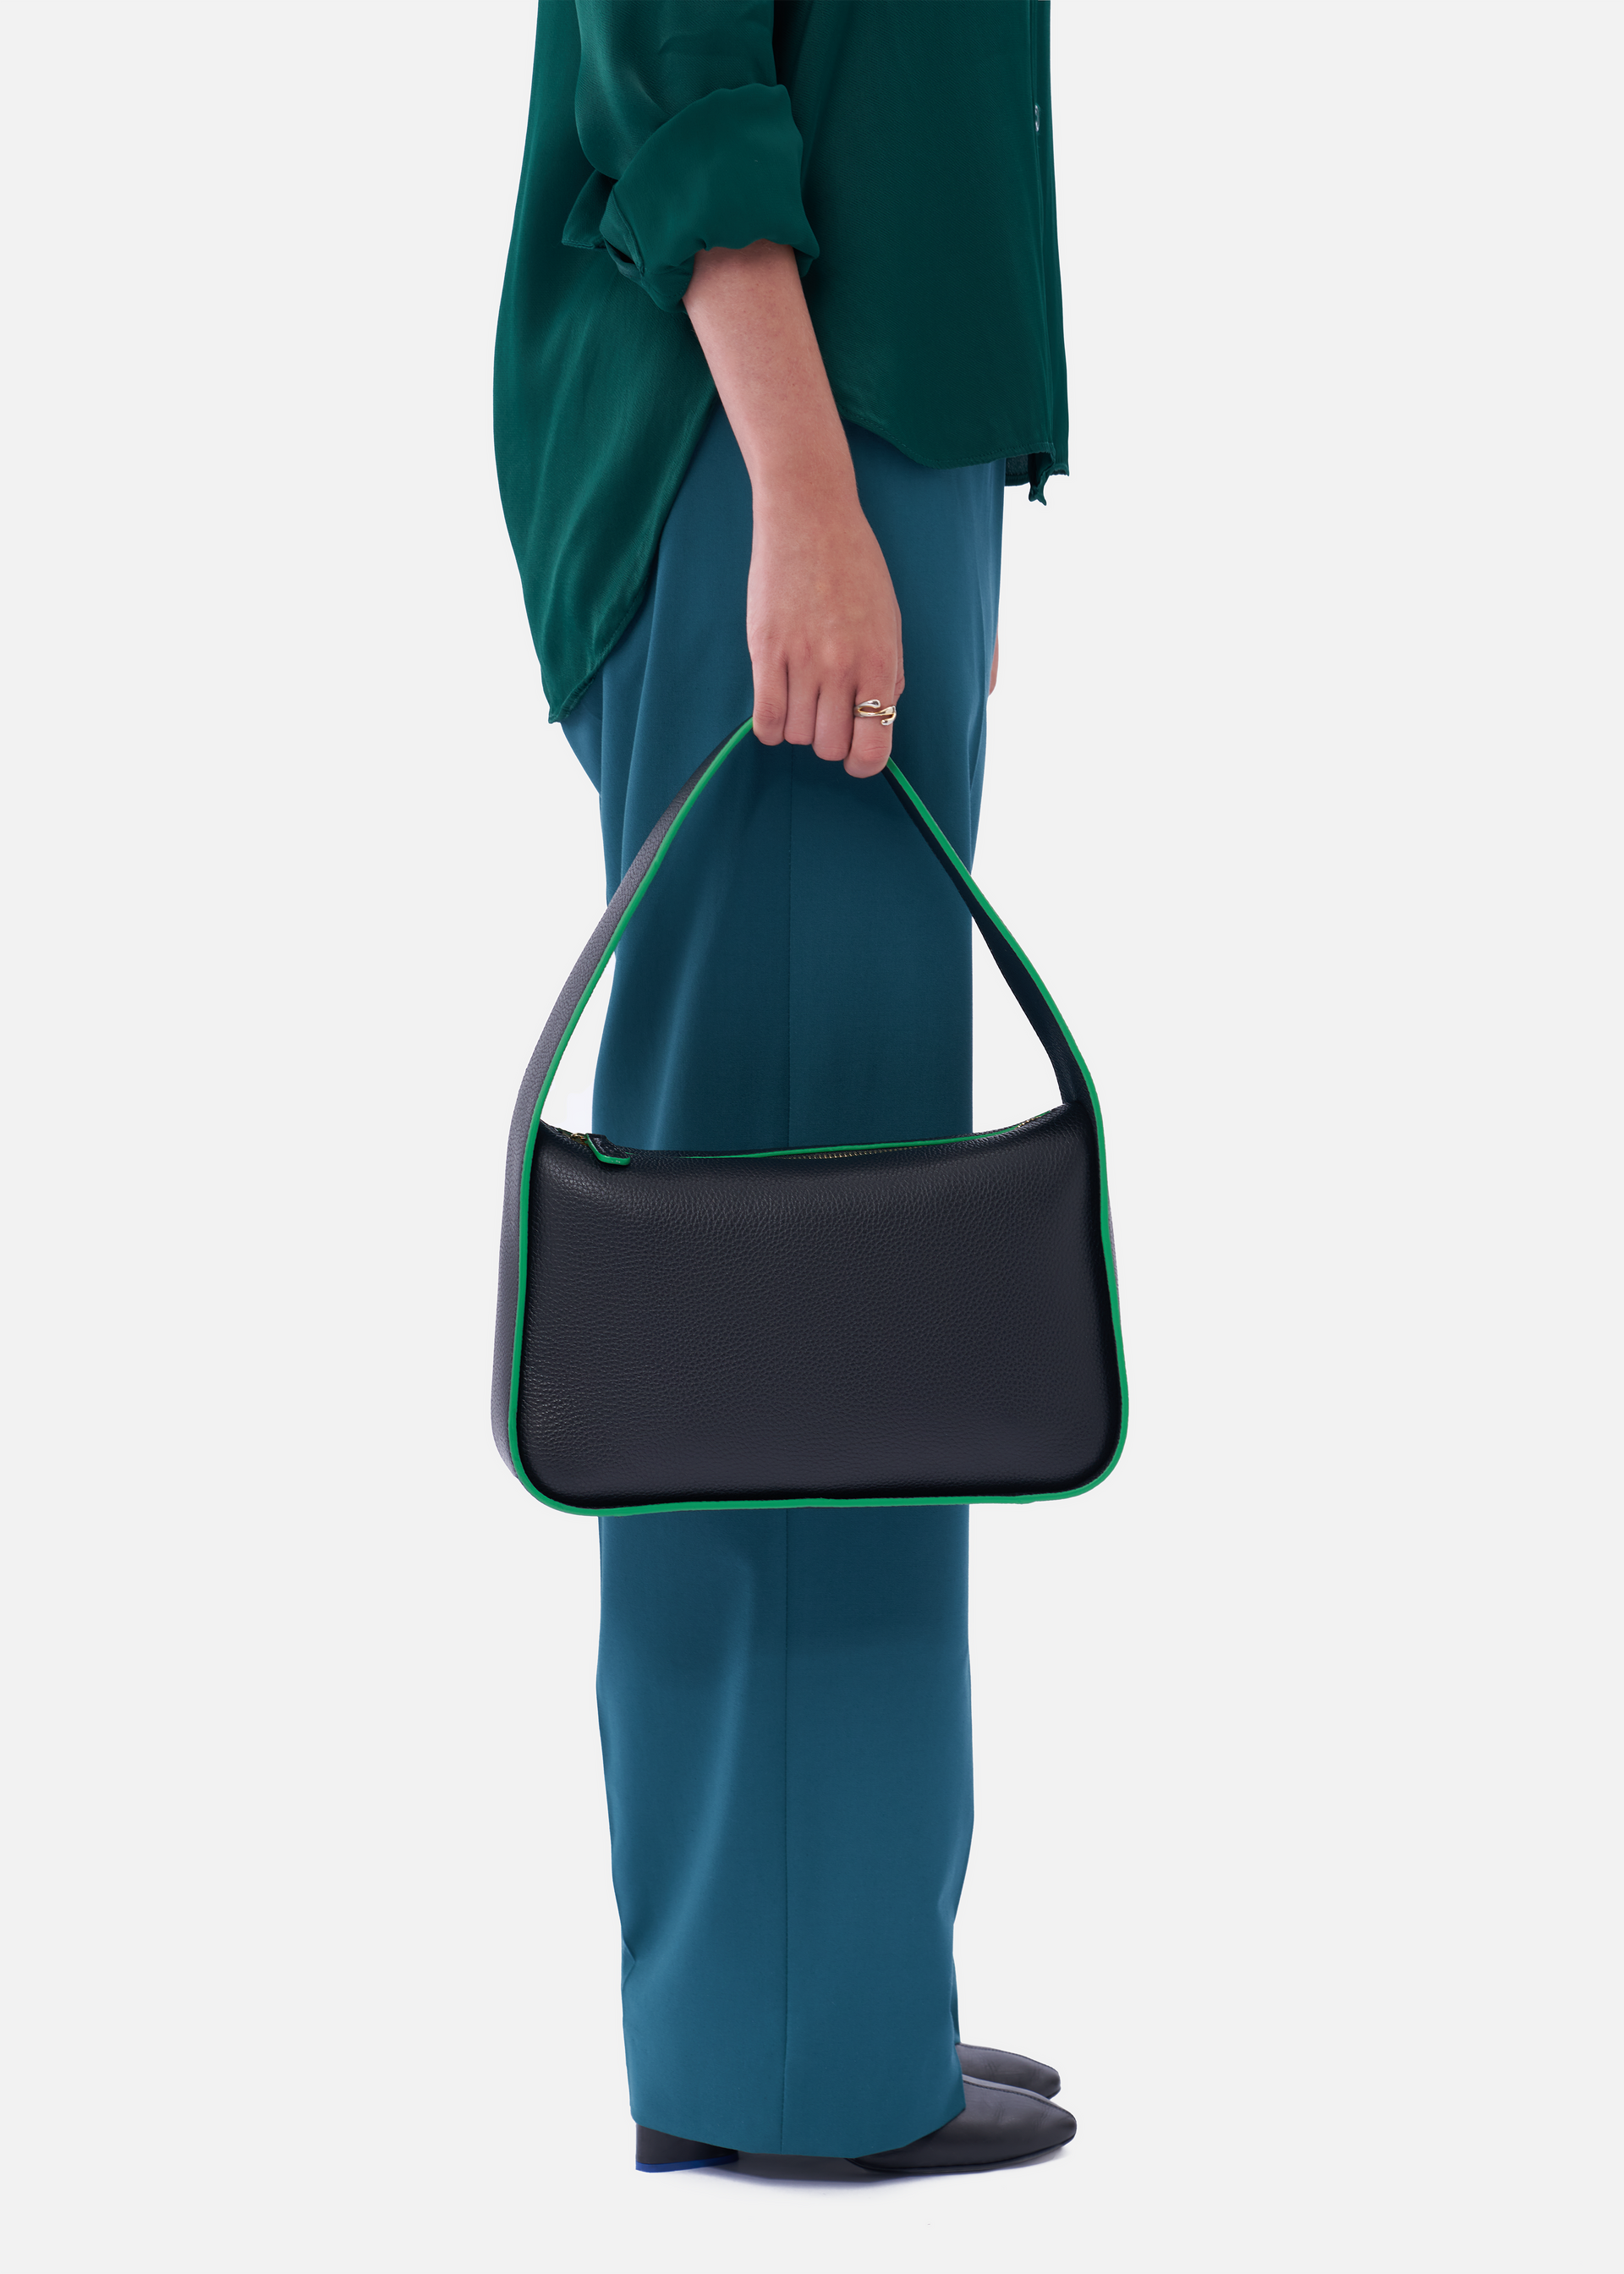 Grete pebble leather shoulder bag in black with green edge paint - ro bags